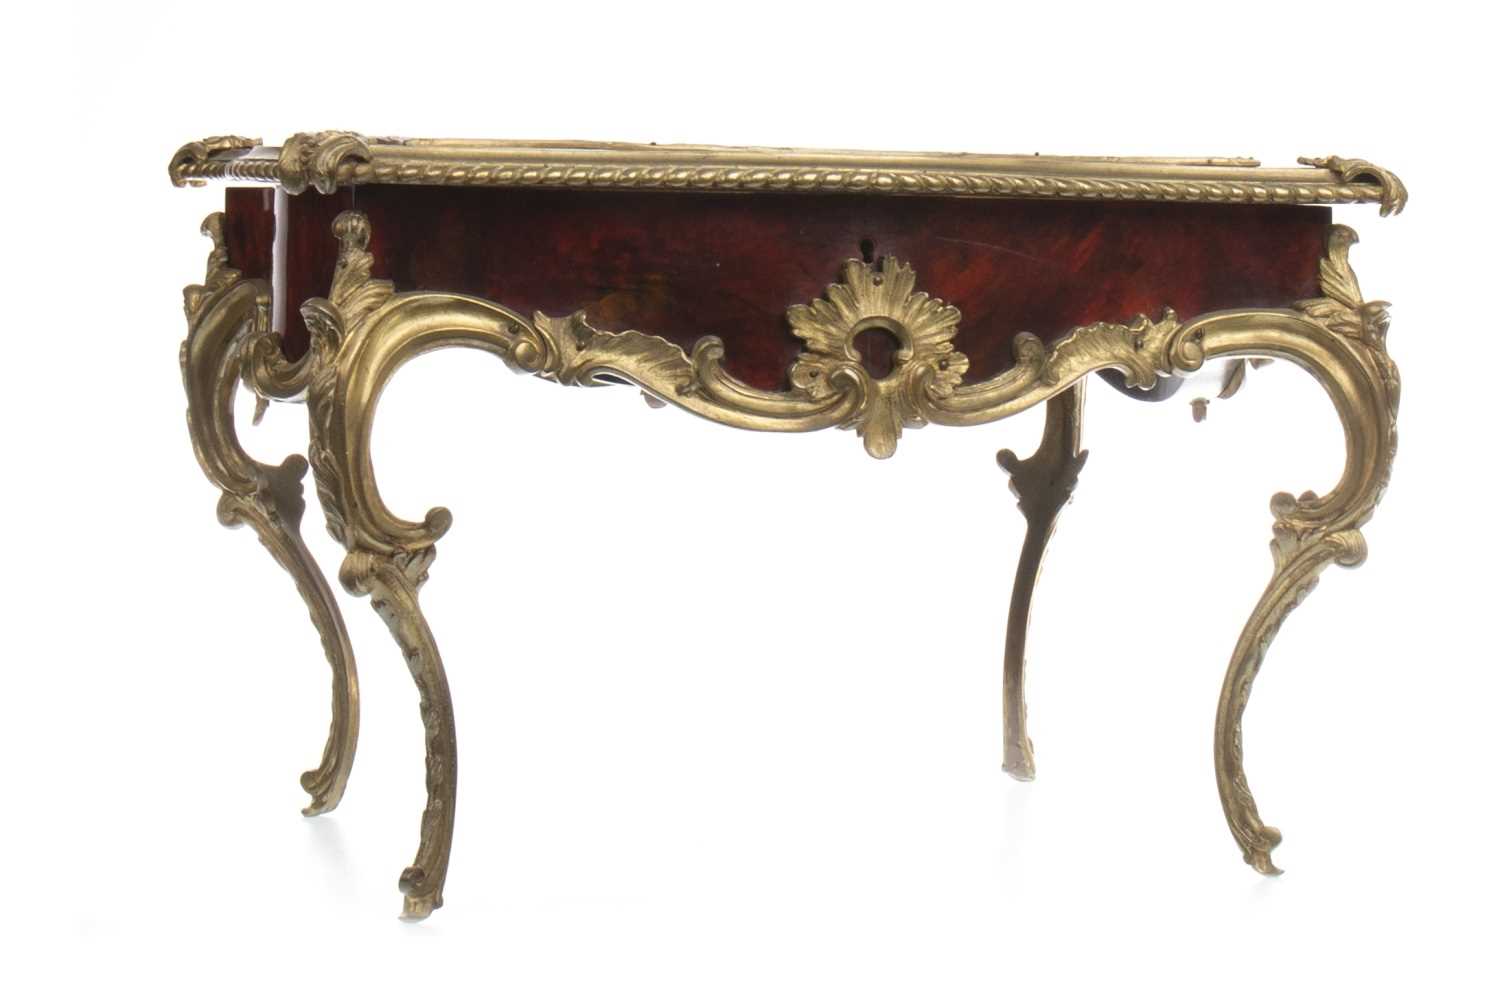 Lot 1832 - A FRENCH LOUIS XV STYLE MINIATURE TABLE VITRINE